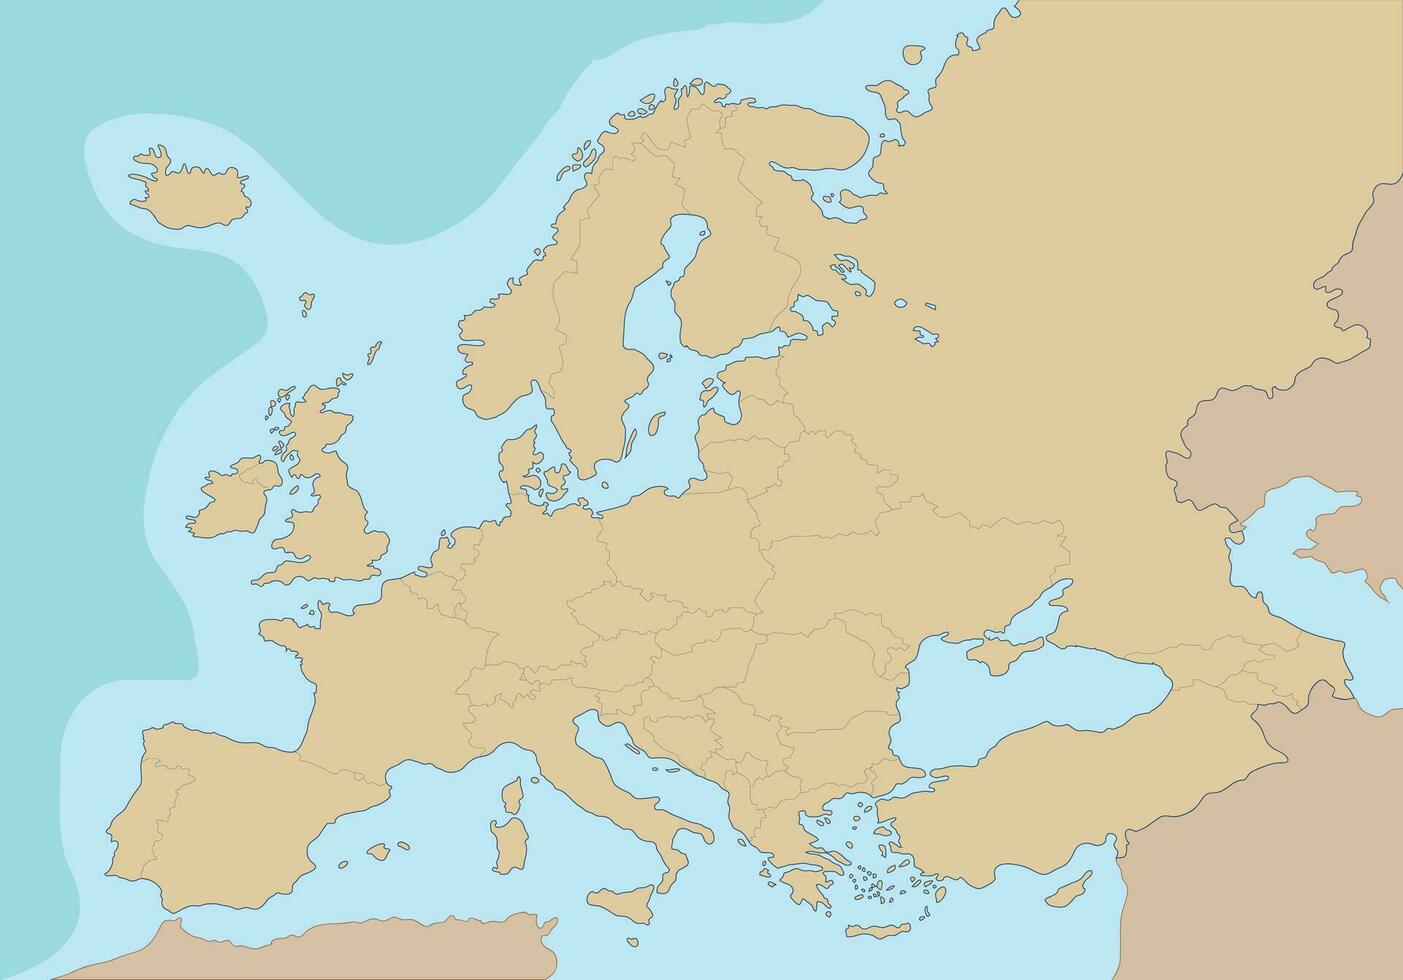 Political map of Europe Vector Illustration